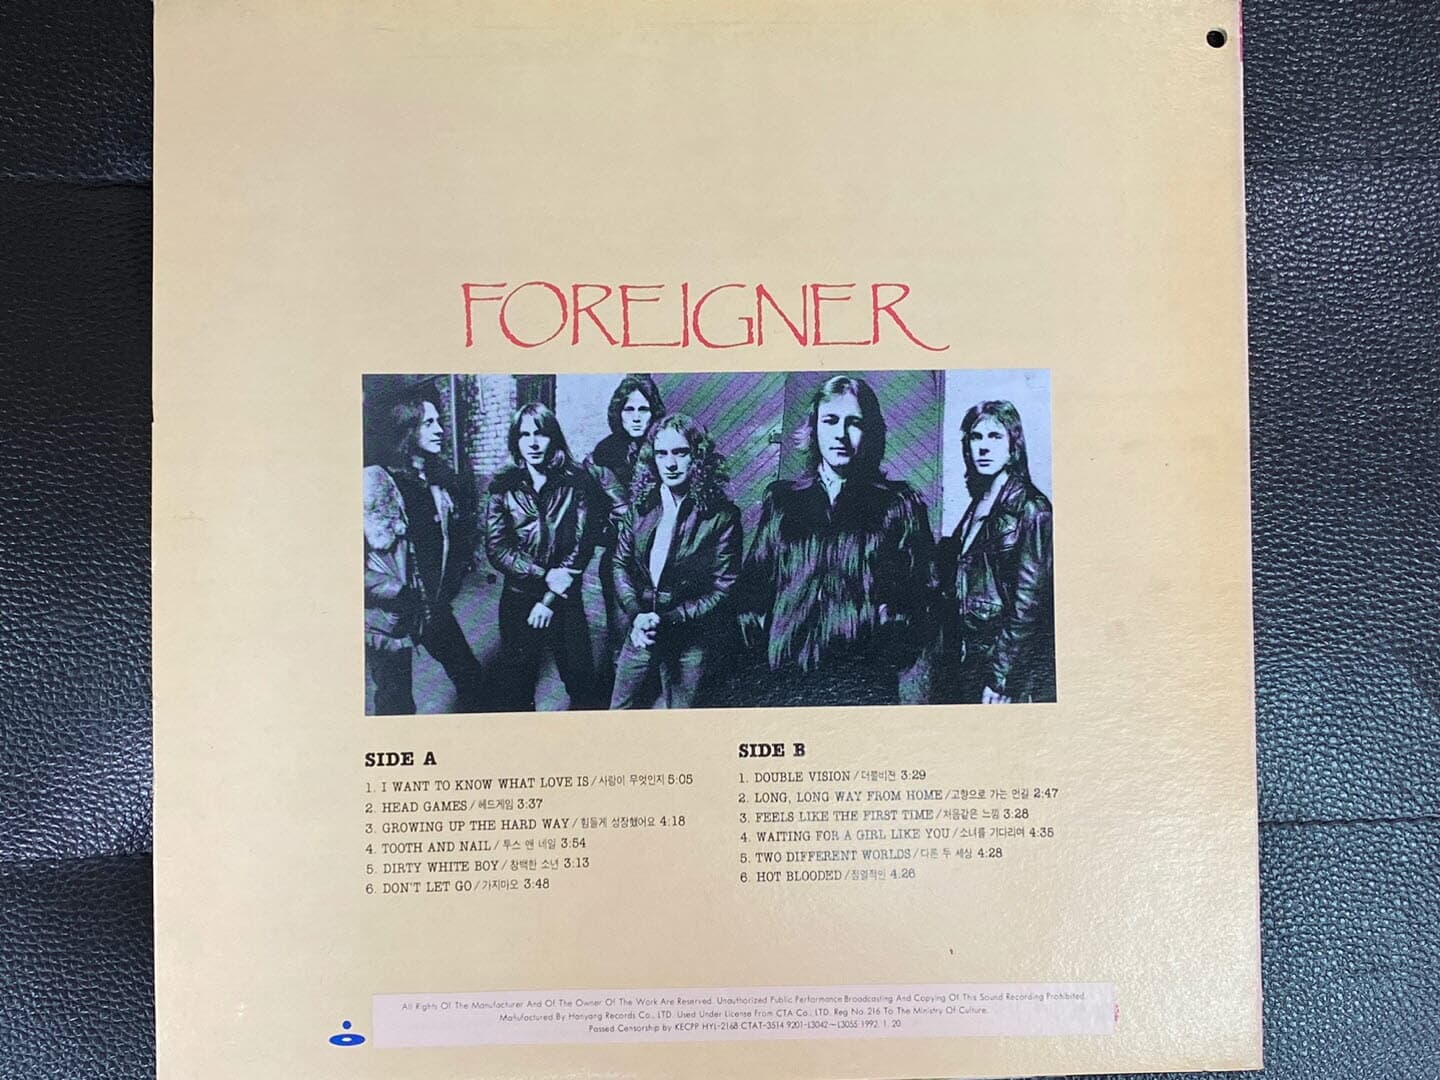 [LP] 포리너 - Foreigner - I Want To Know What Love Is LP [한양-라이센스반]